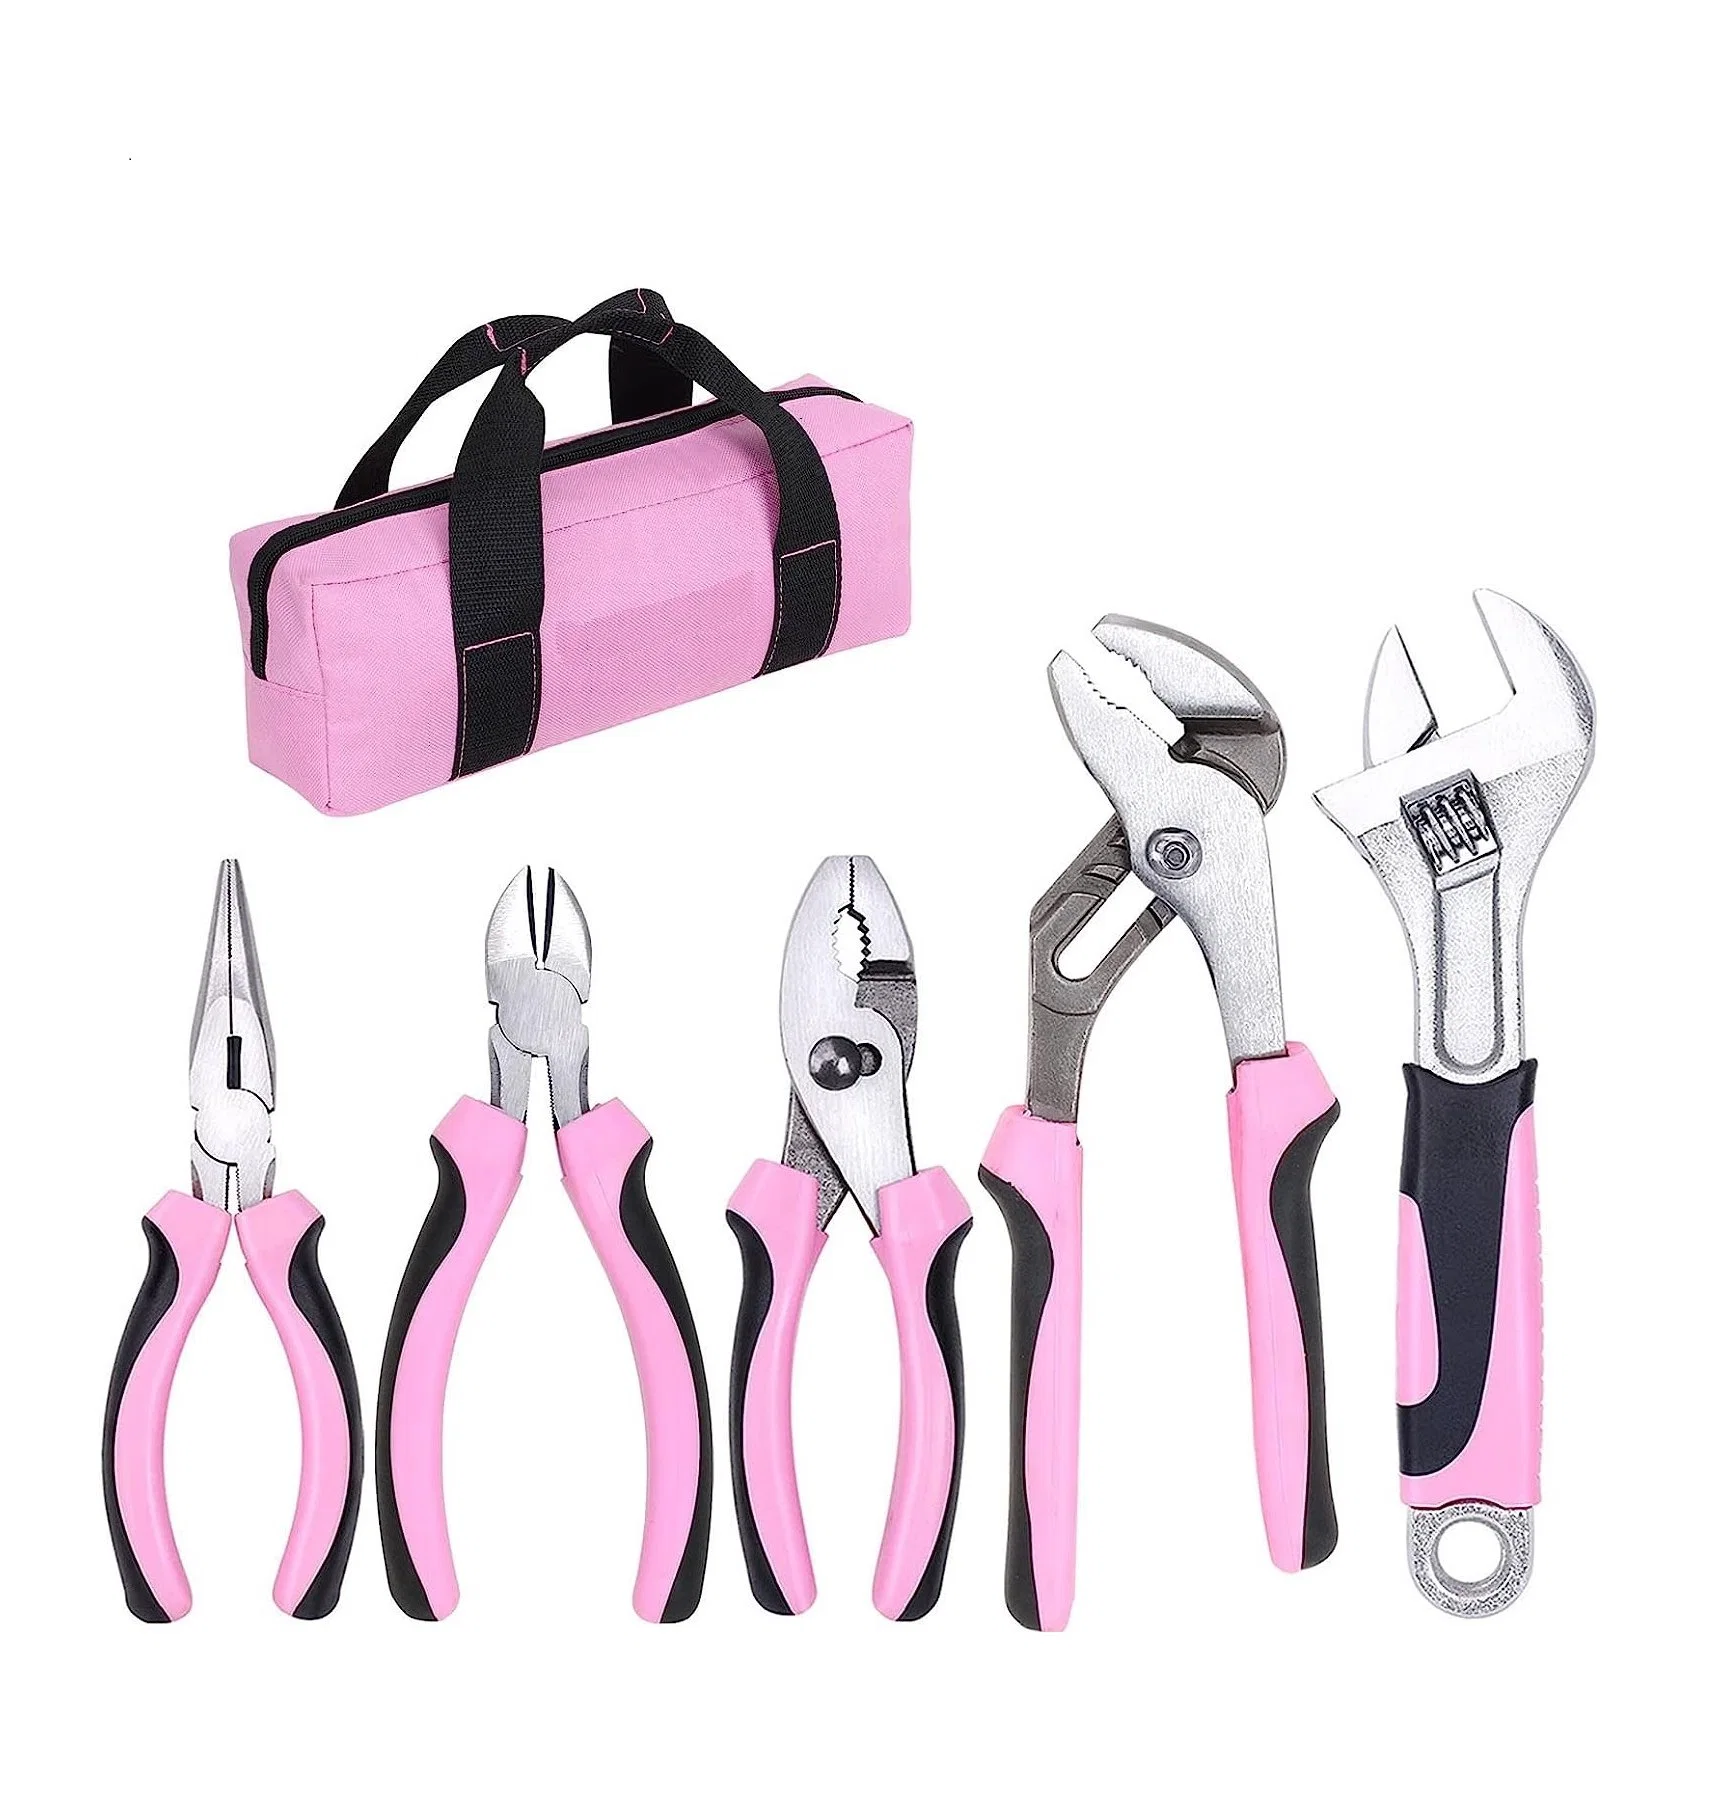 Professional OEM Factory 5-Piece Tools Pliers Set with Comfortable Grip